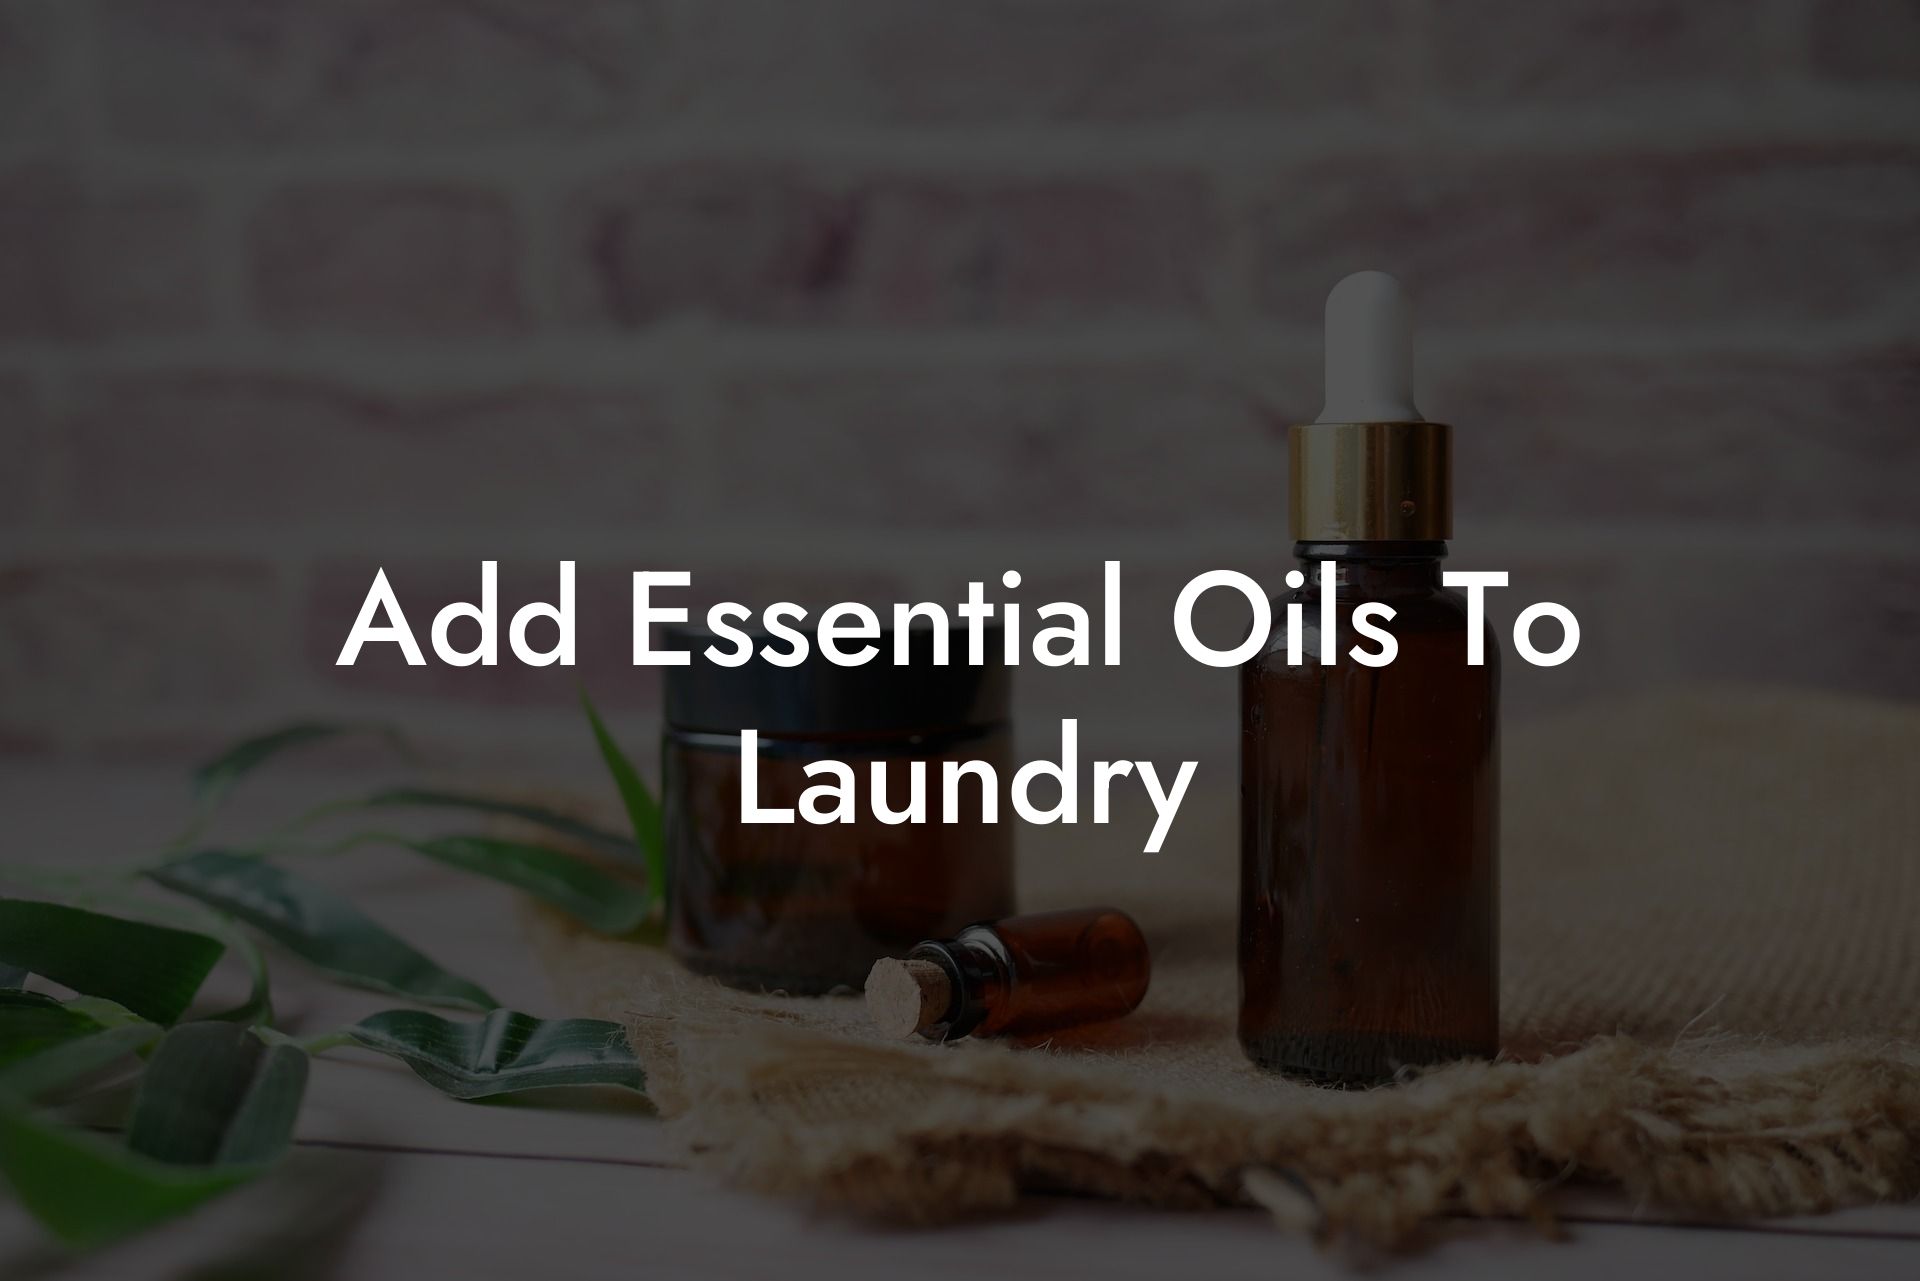 Add Essential Oils To Laundry